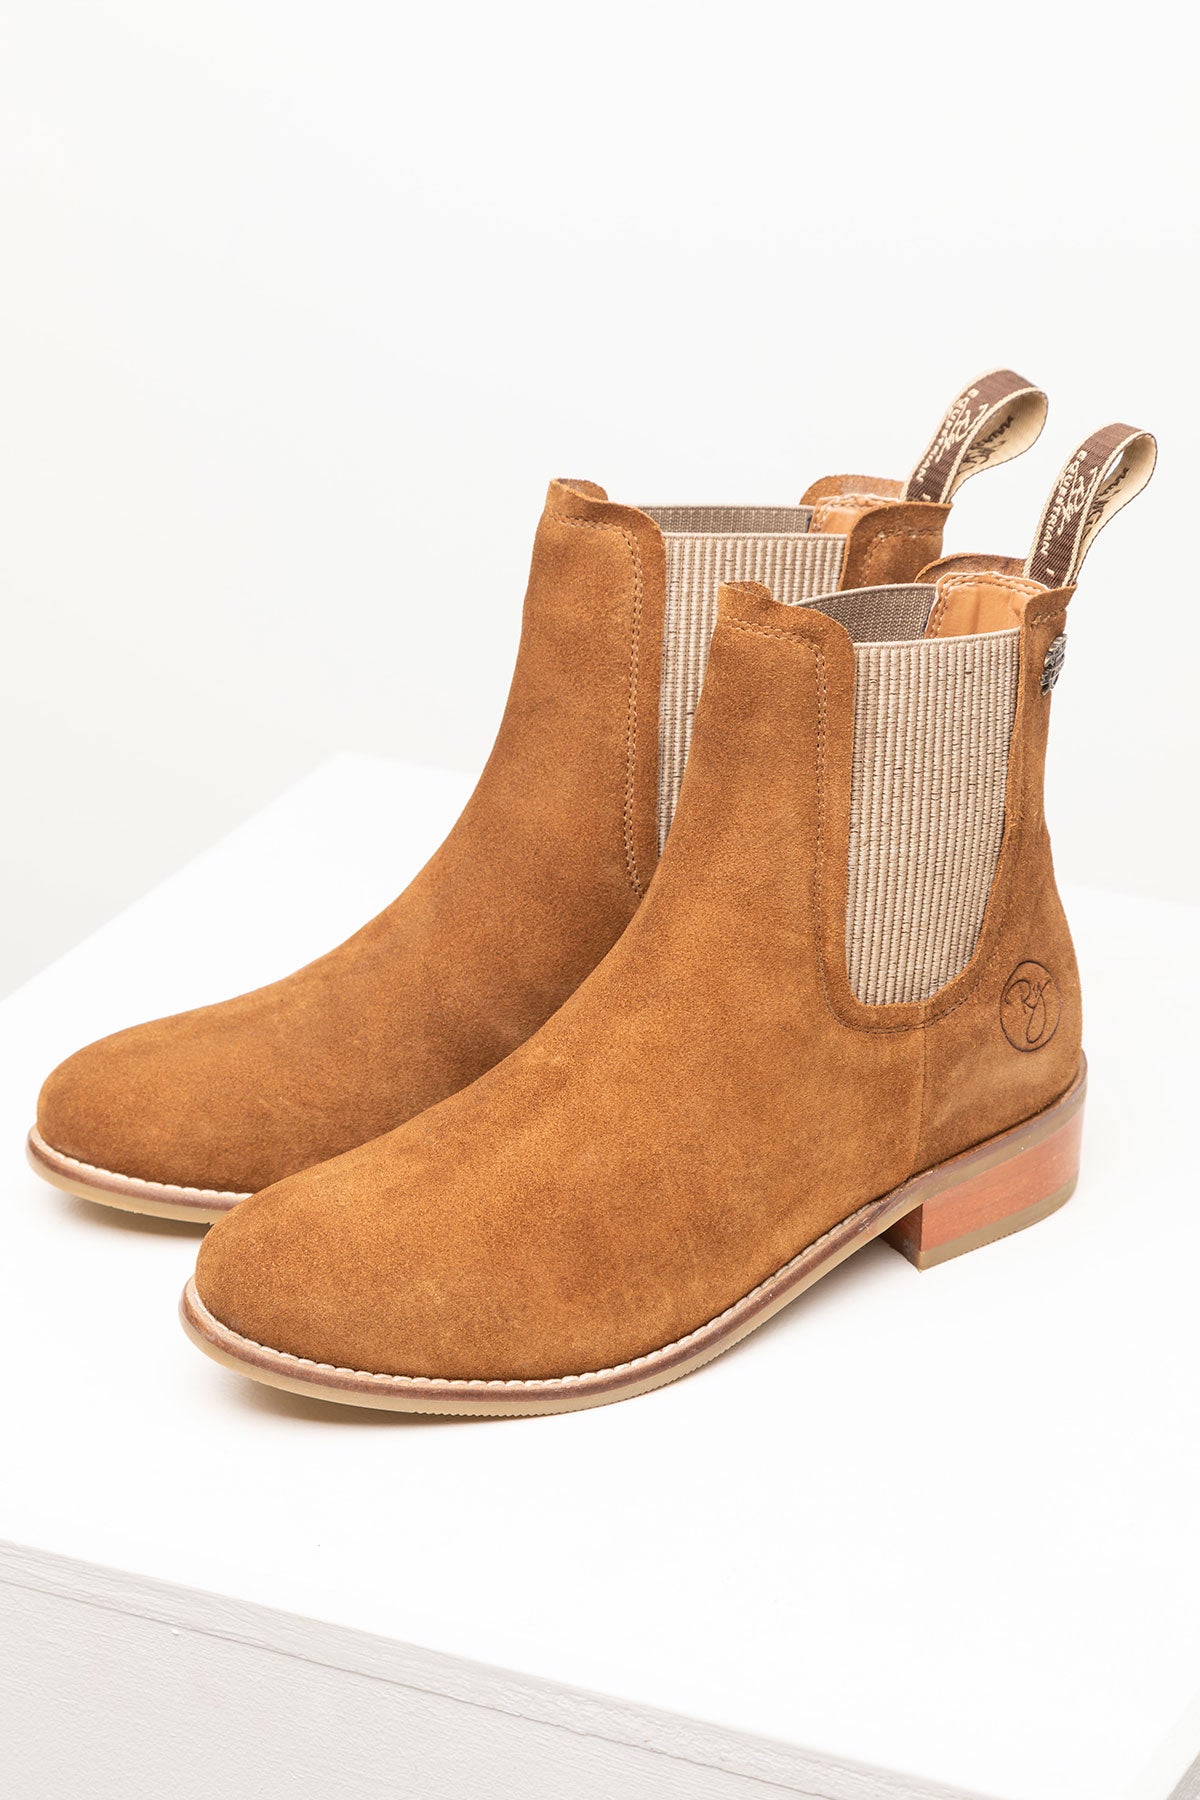 Karriere Konsekvenser lodret Ladies Suede Ankle Boots UK | Womens Heeled Chelsea Boots | Rydale